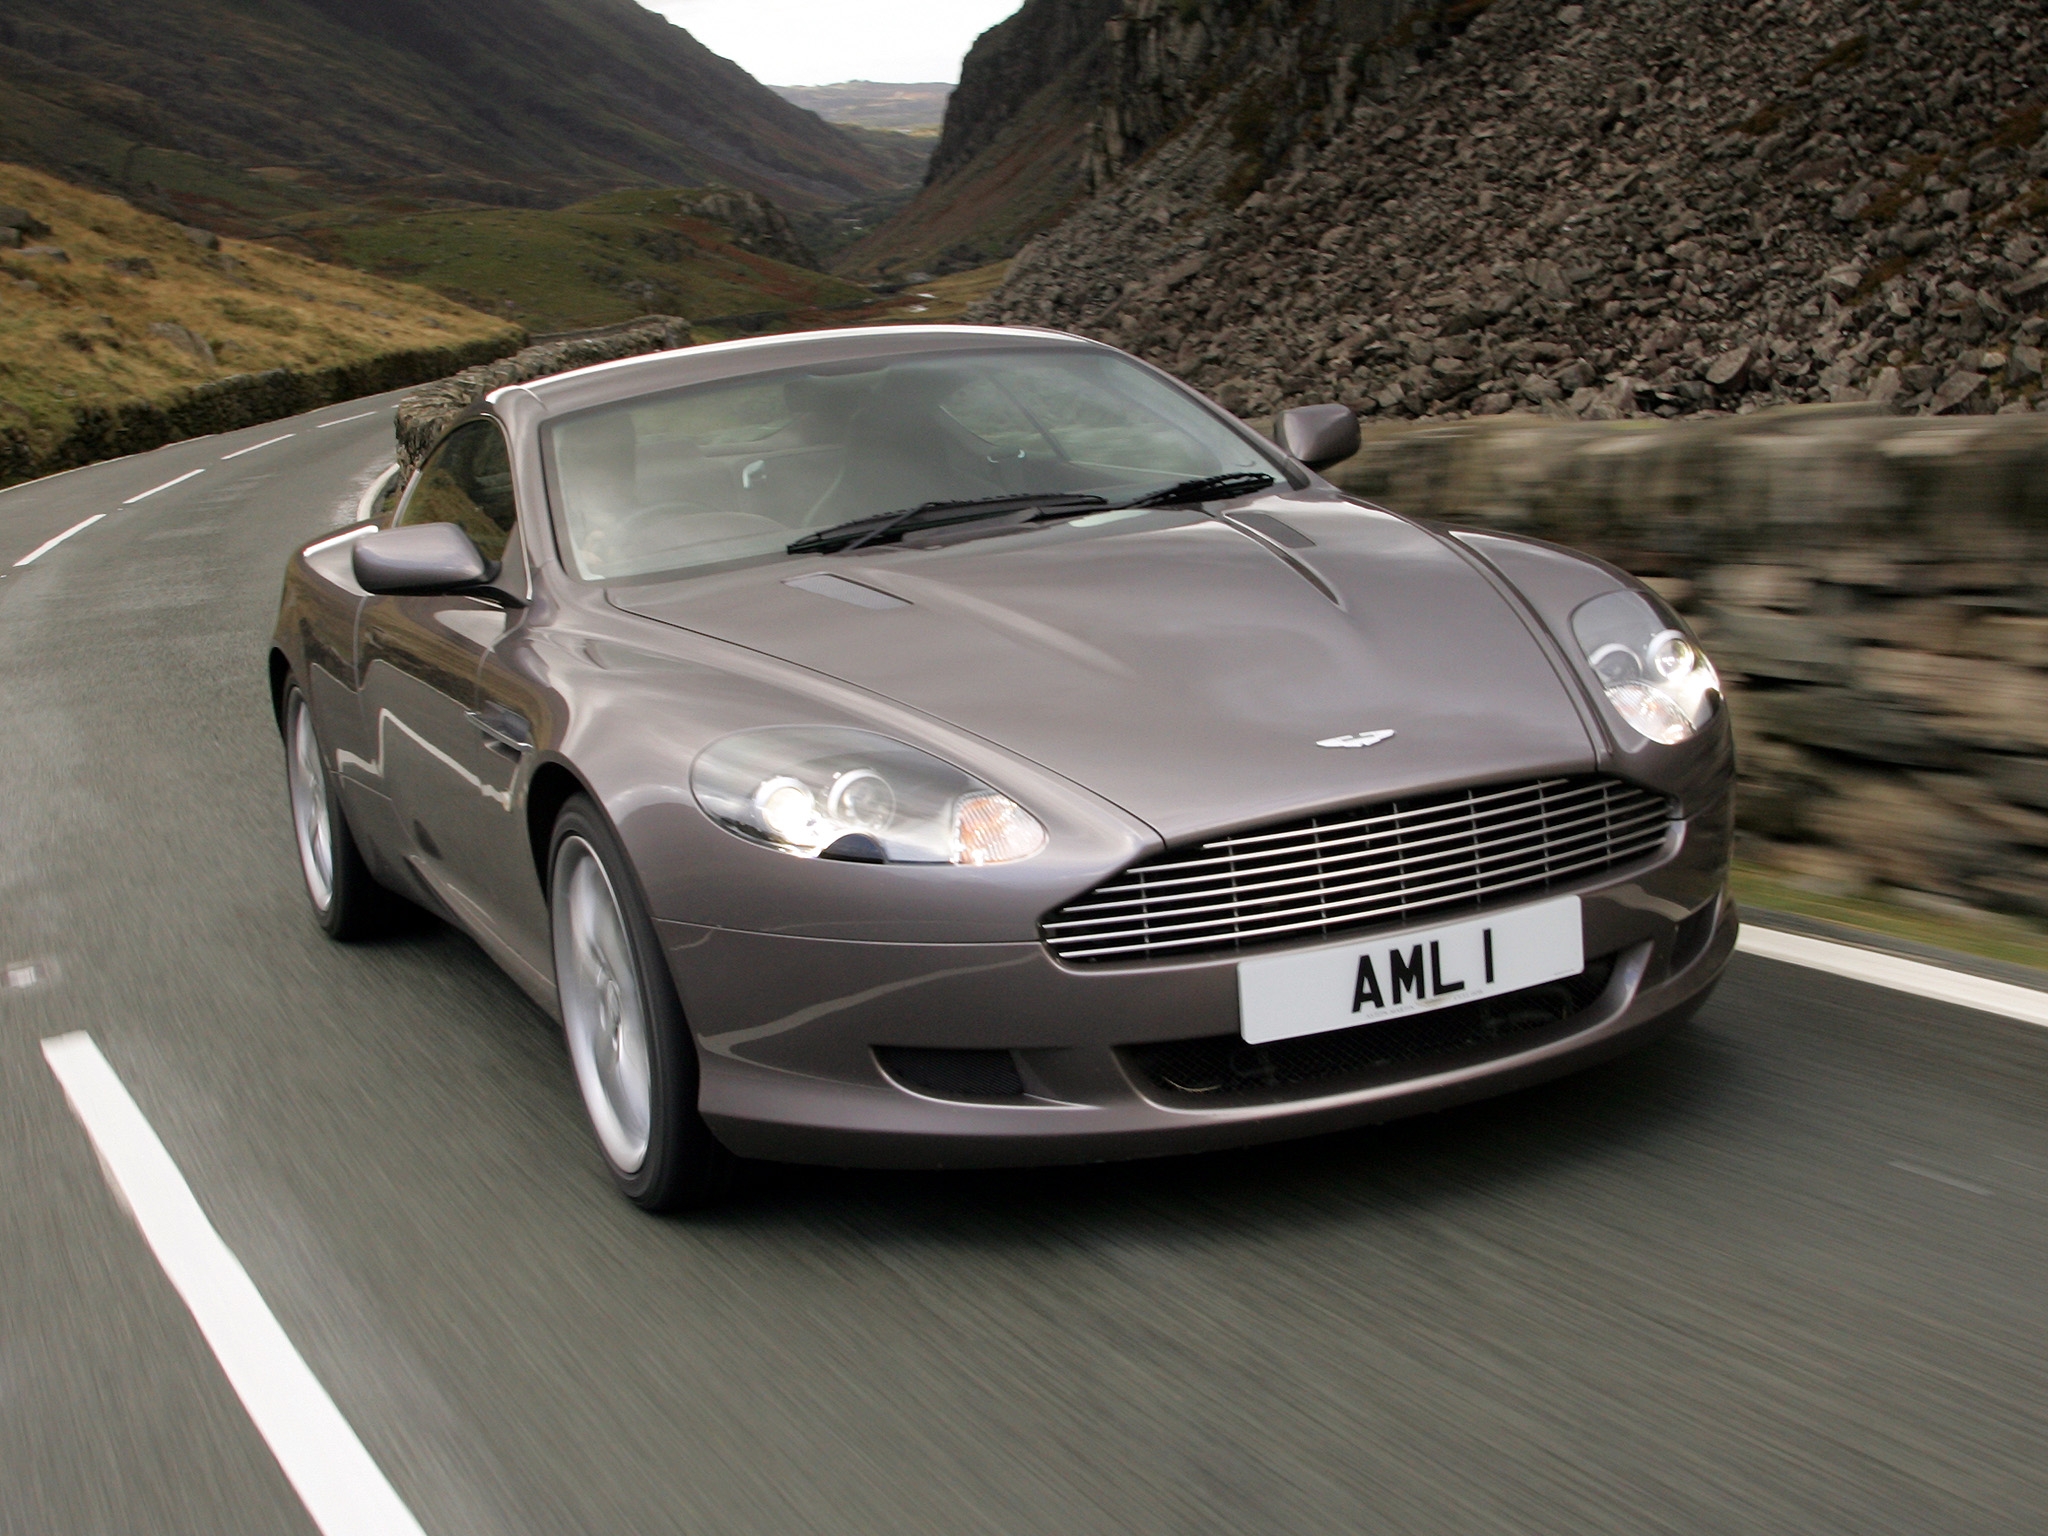 Wallpaper Full HD auto, mountains, aston martin, cars, asphalt, front view, grey, speed, style, 2004, db9